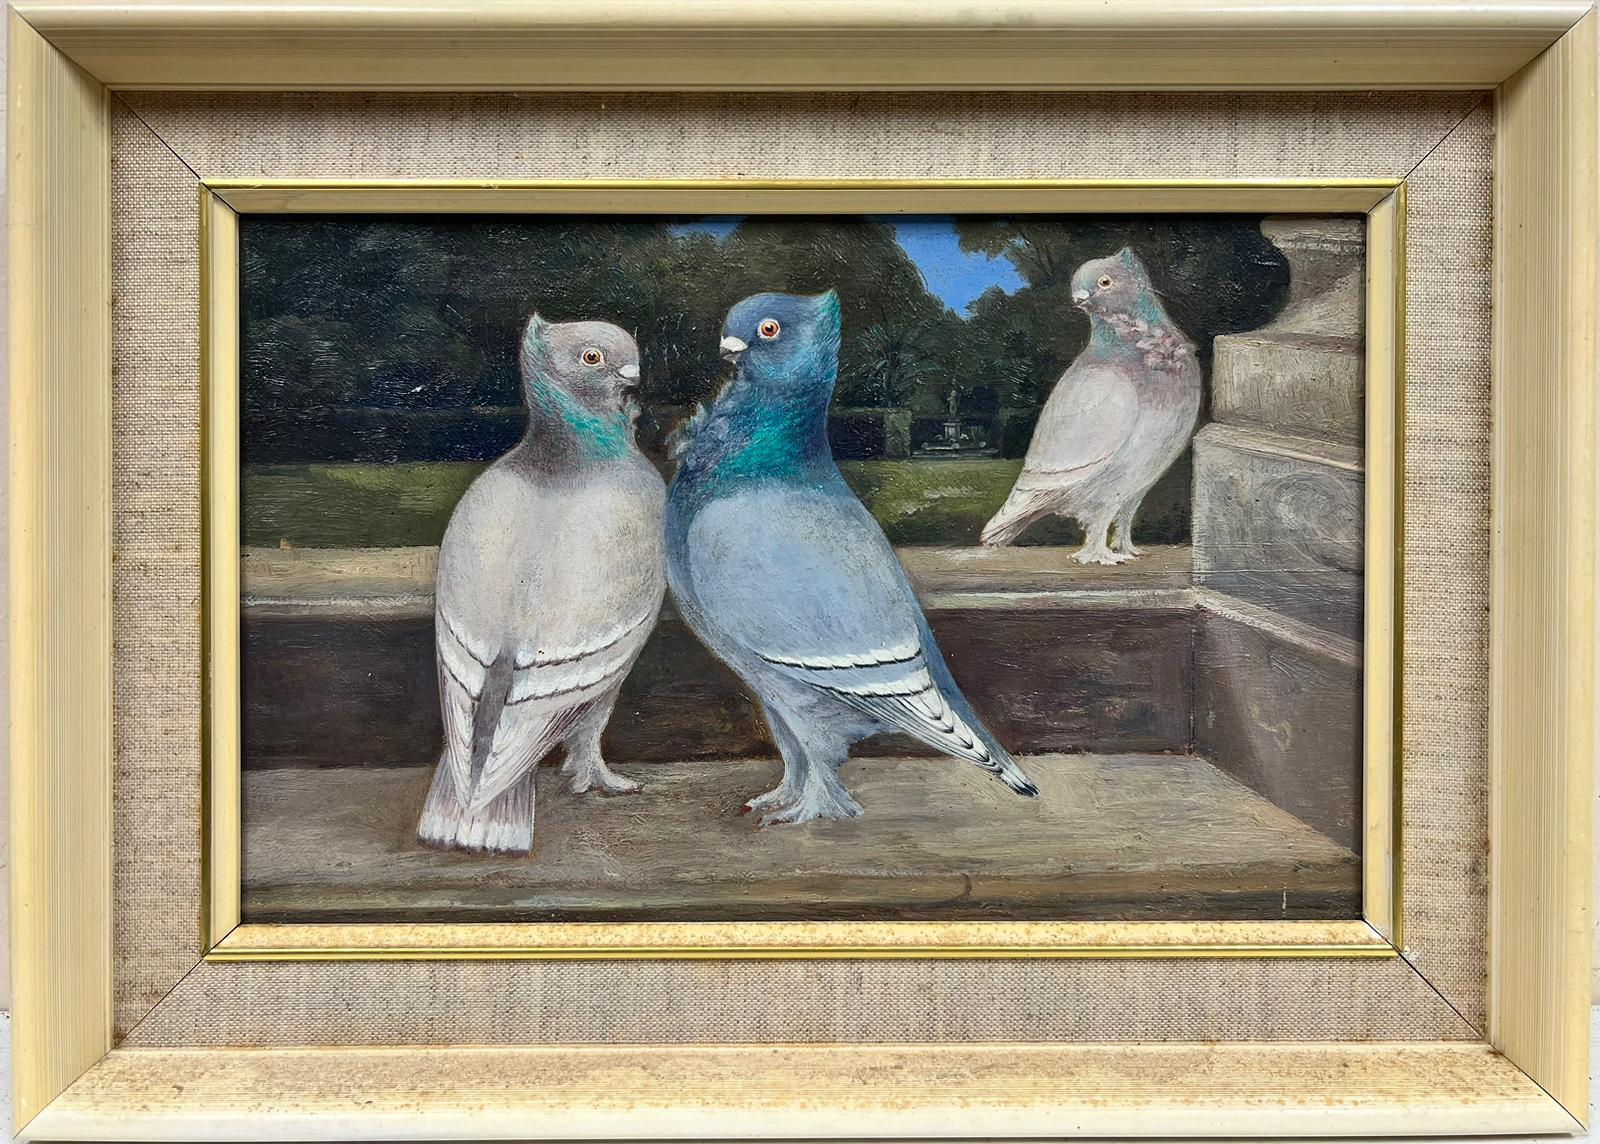 Pigeons Doves in Ornamental Park Landscape, Early Bird original oil painting - Painting by Antique English oil